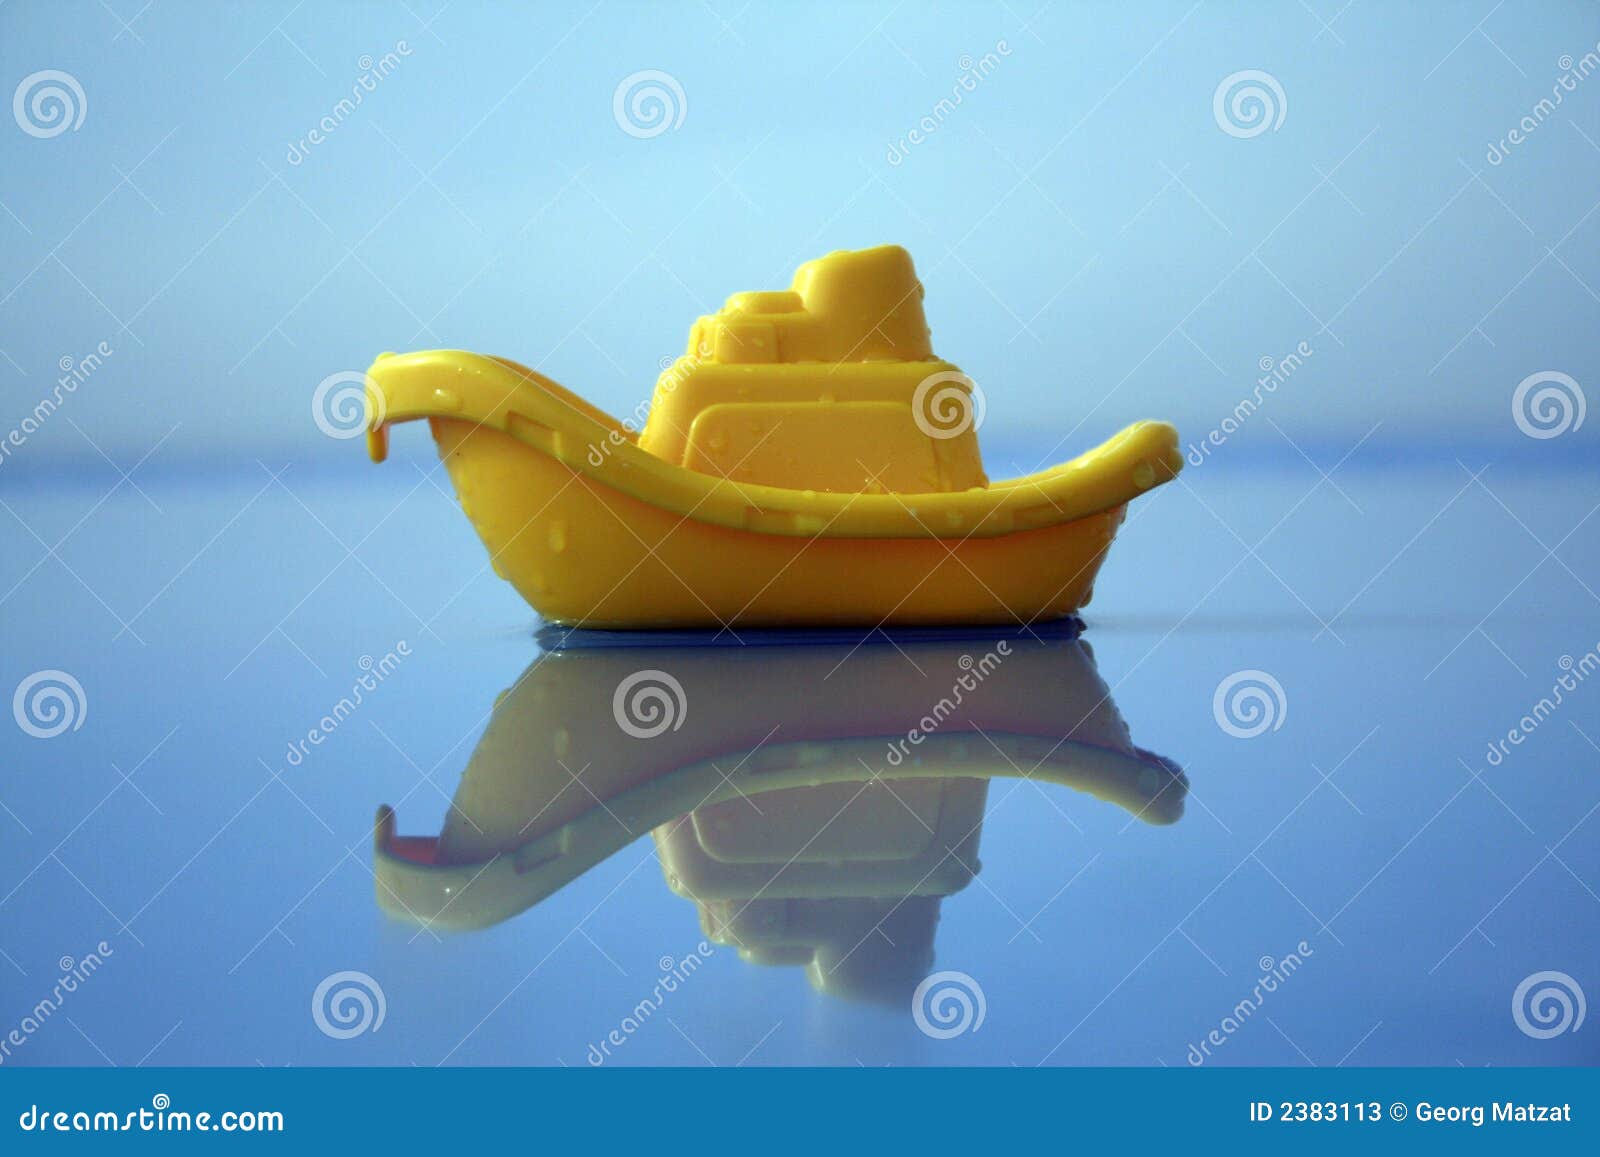 Yellow Toy Boat Stock Photos - Image: 2383113